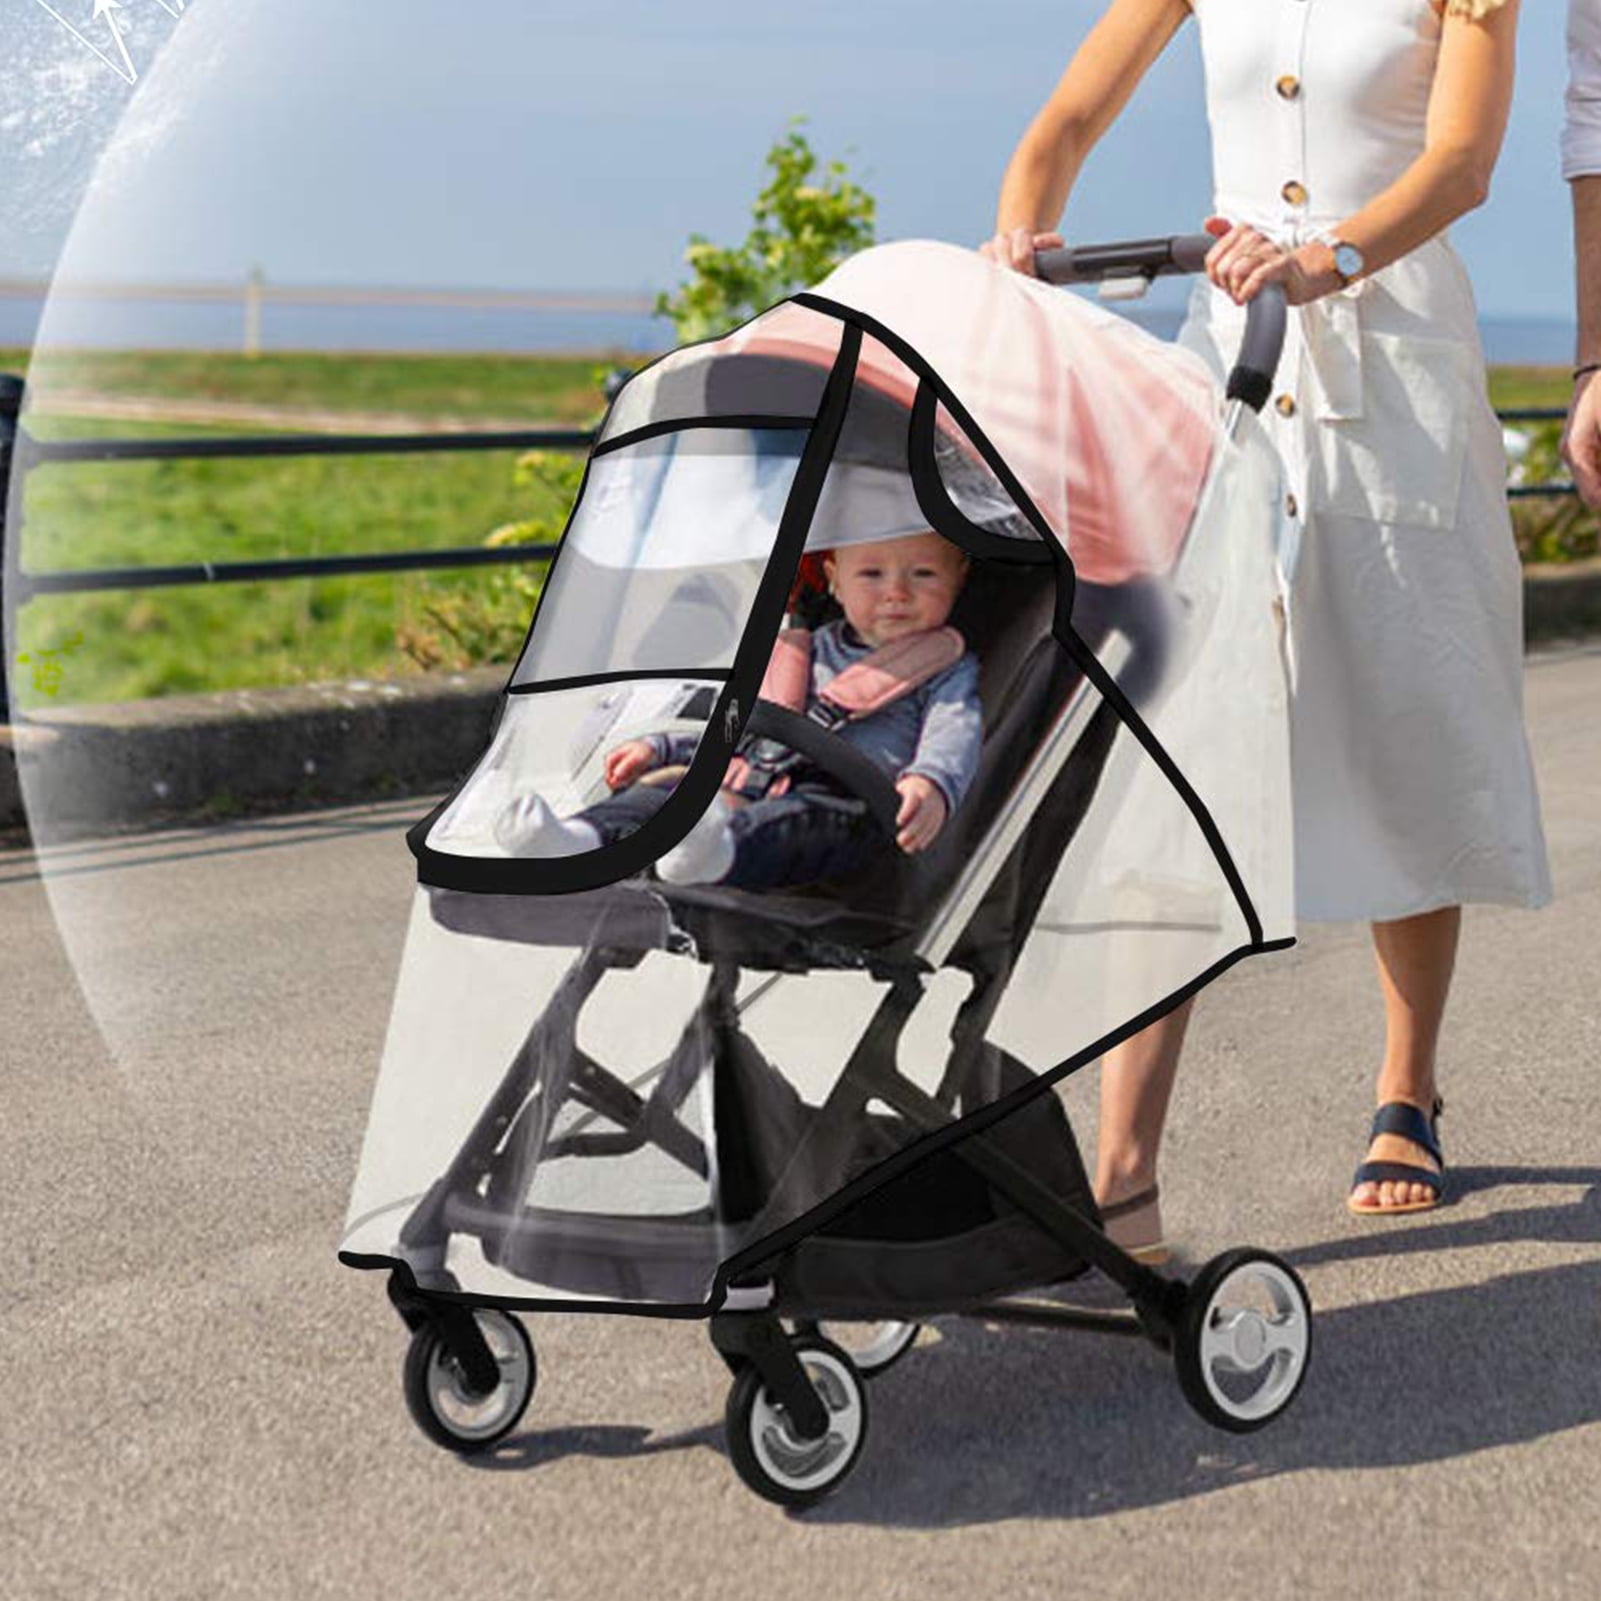 Stroller Rain Cover Universal Dust Cover for Baby Carrier Waterproof Stroller Weather Shield Cover,Food Grade EVA Shade No Odor Snow Wind Protection Baby Travel Accessory LLUFO